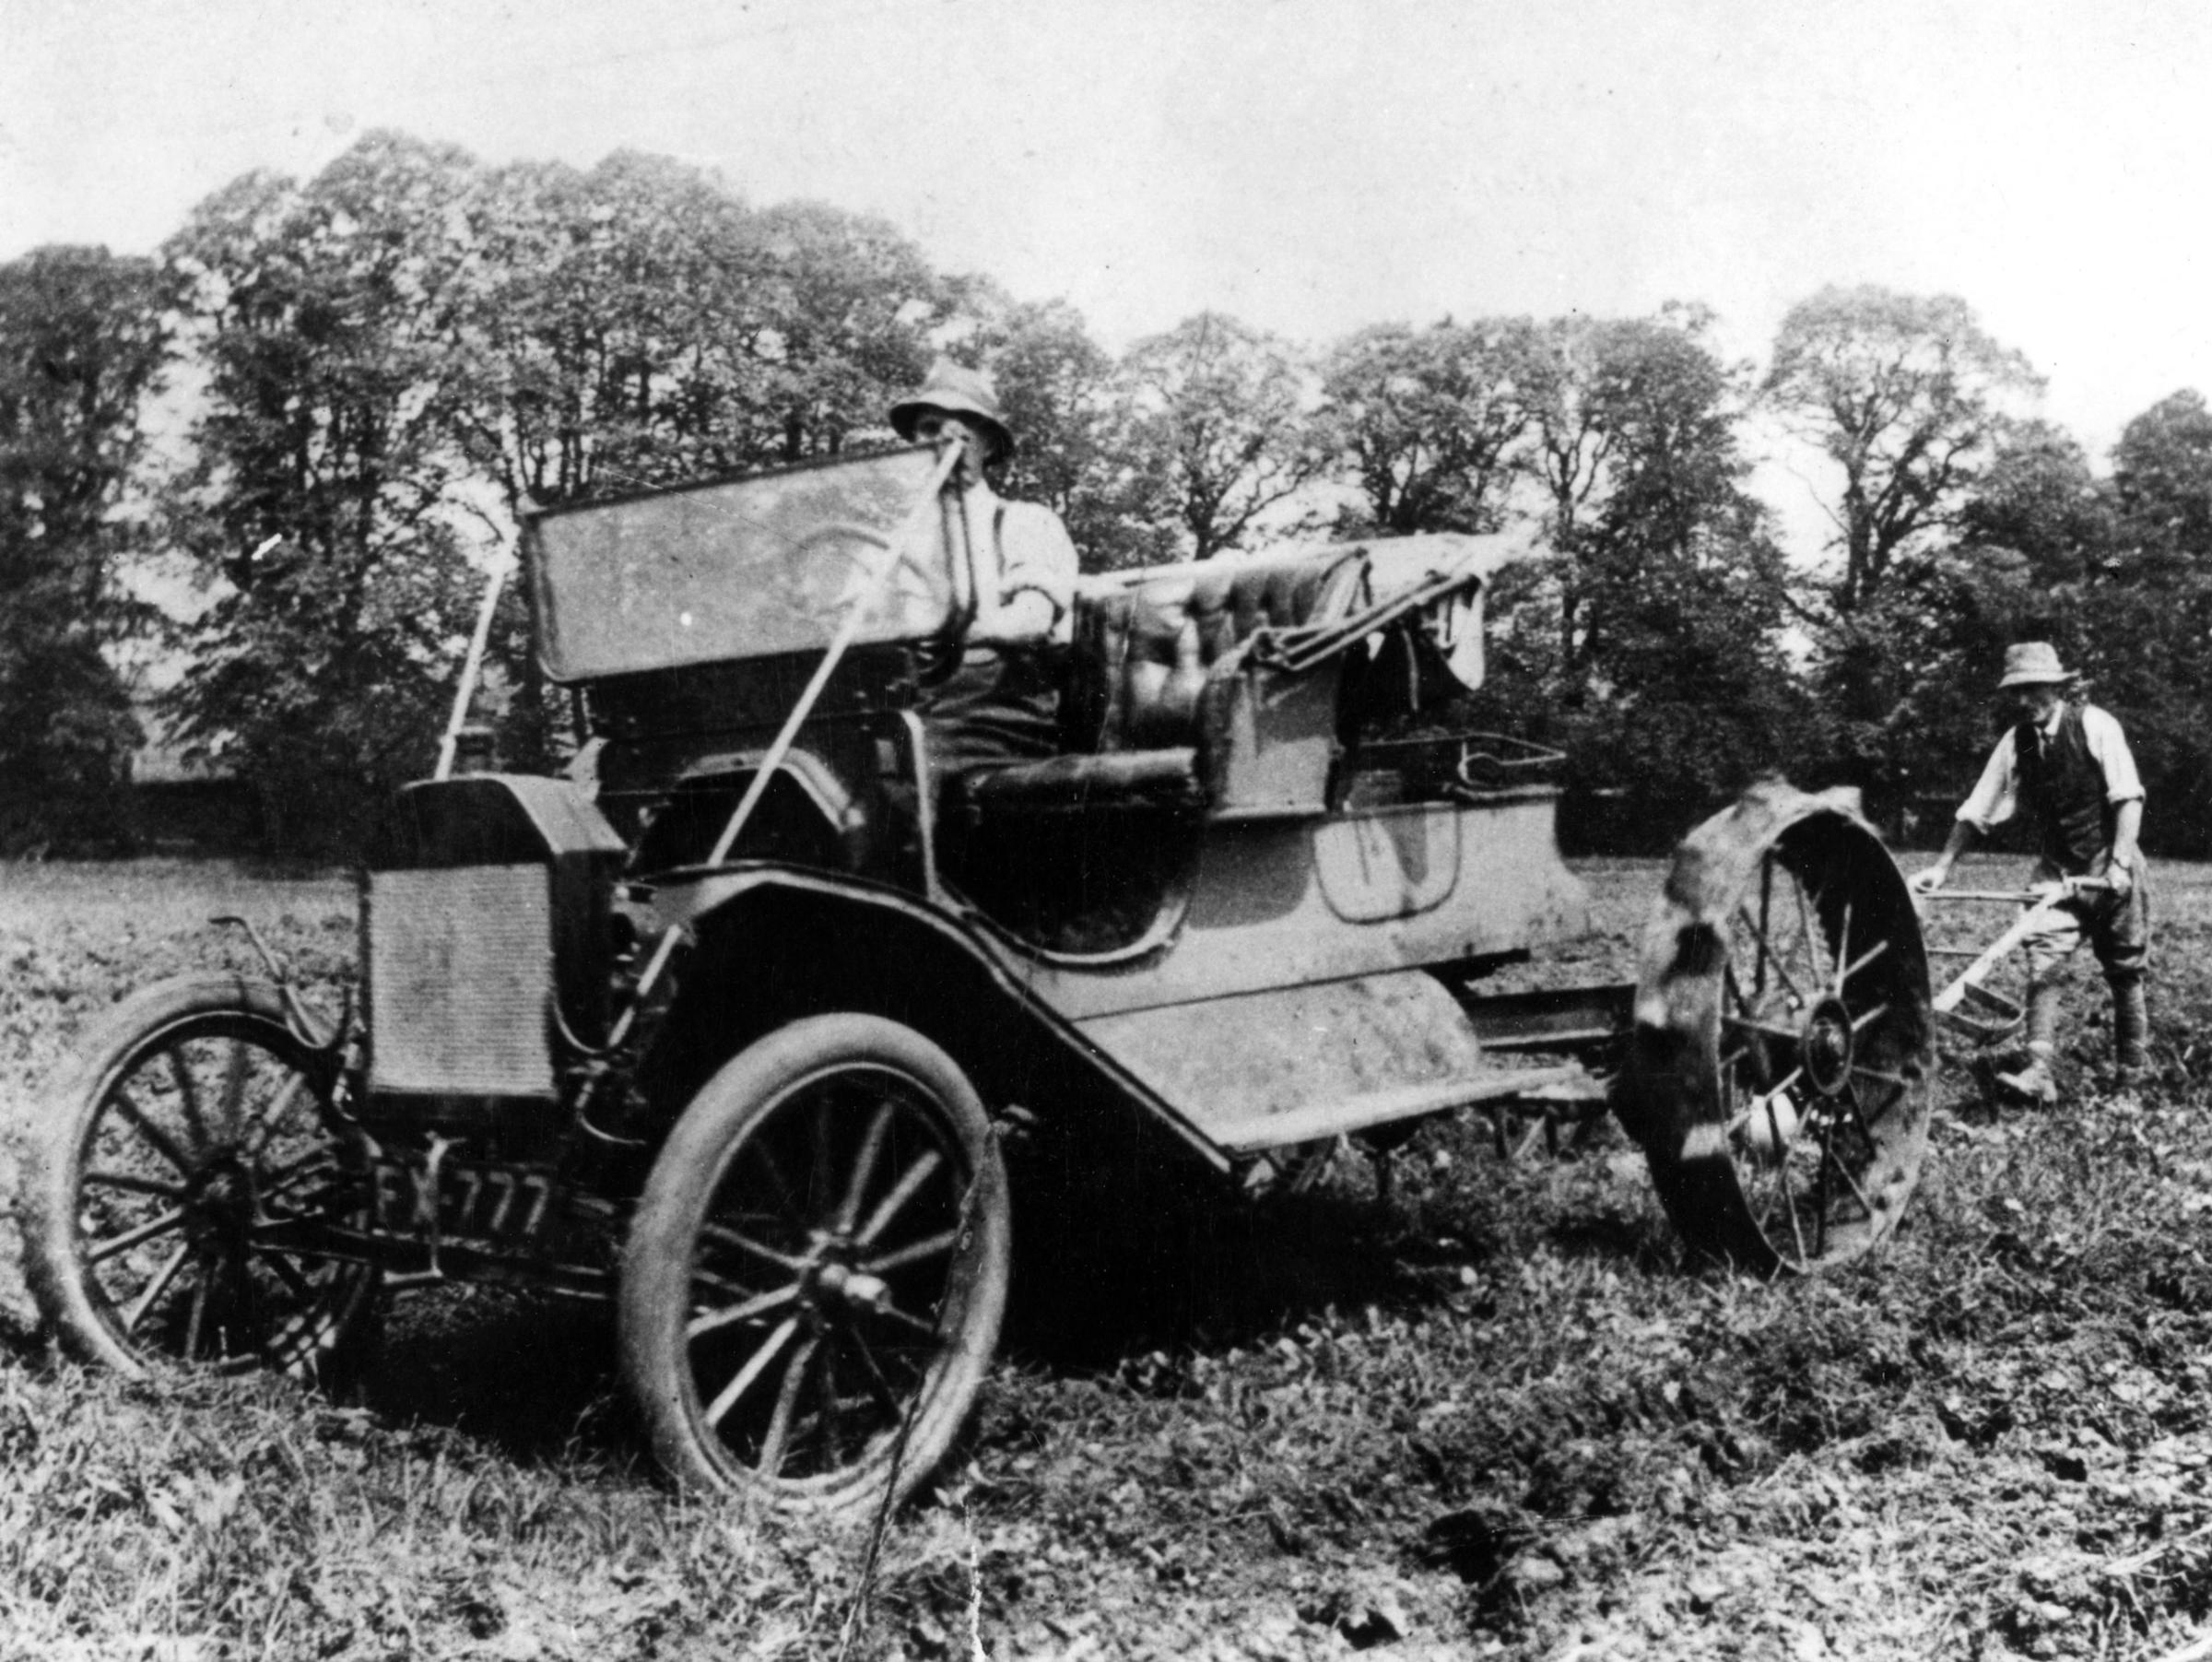 Model T Ford with Stephenson agricultural conversion, Sussex, 1917.